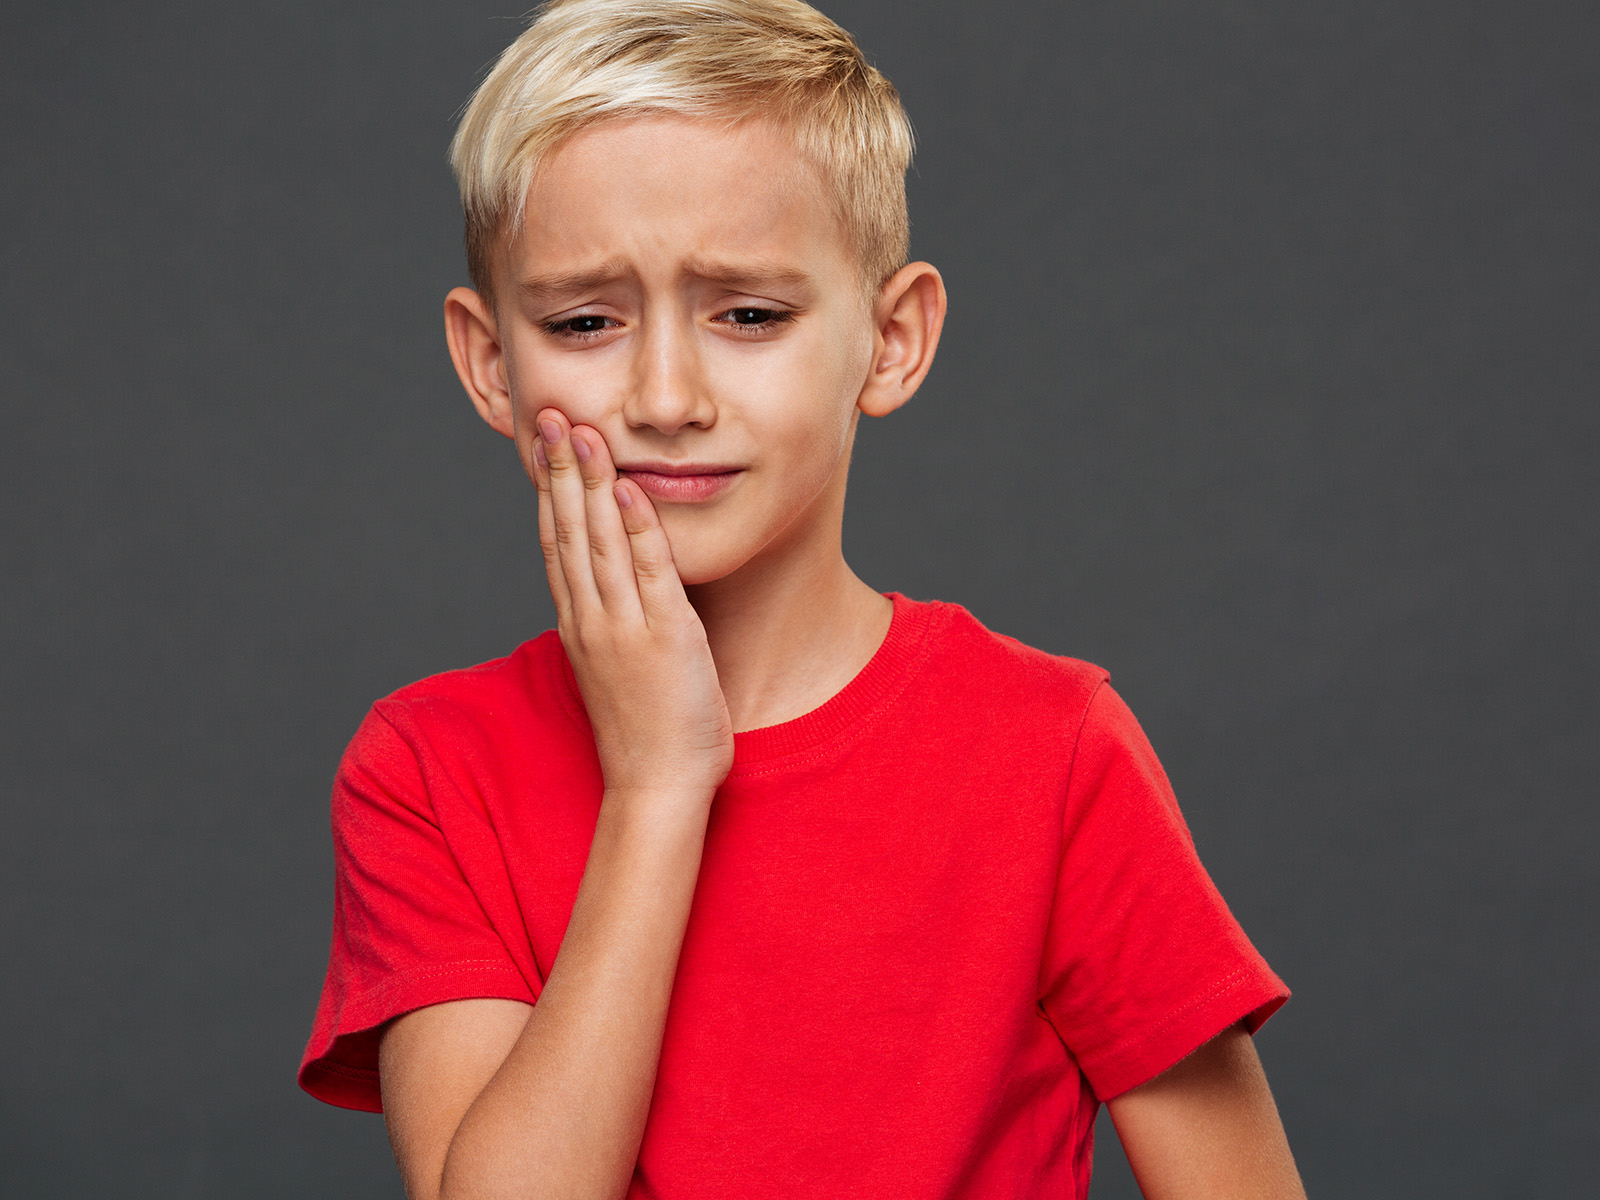 What To Do For A Child With A Toothache?